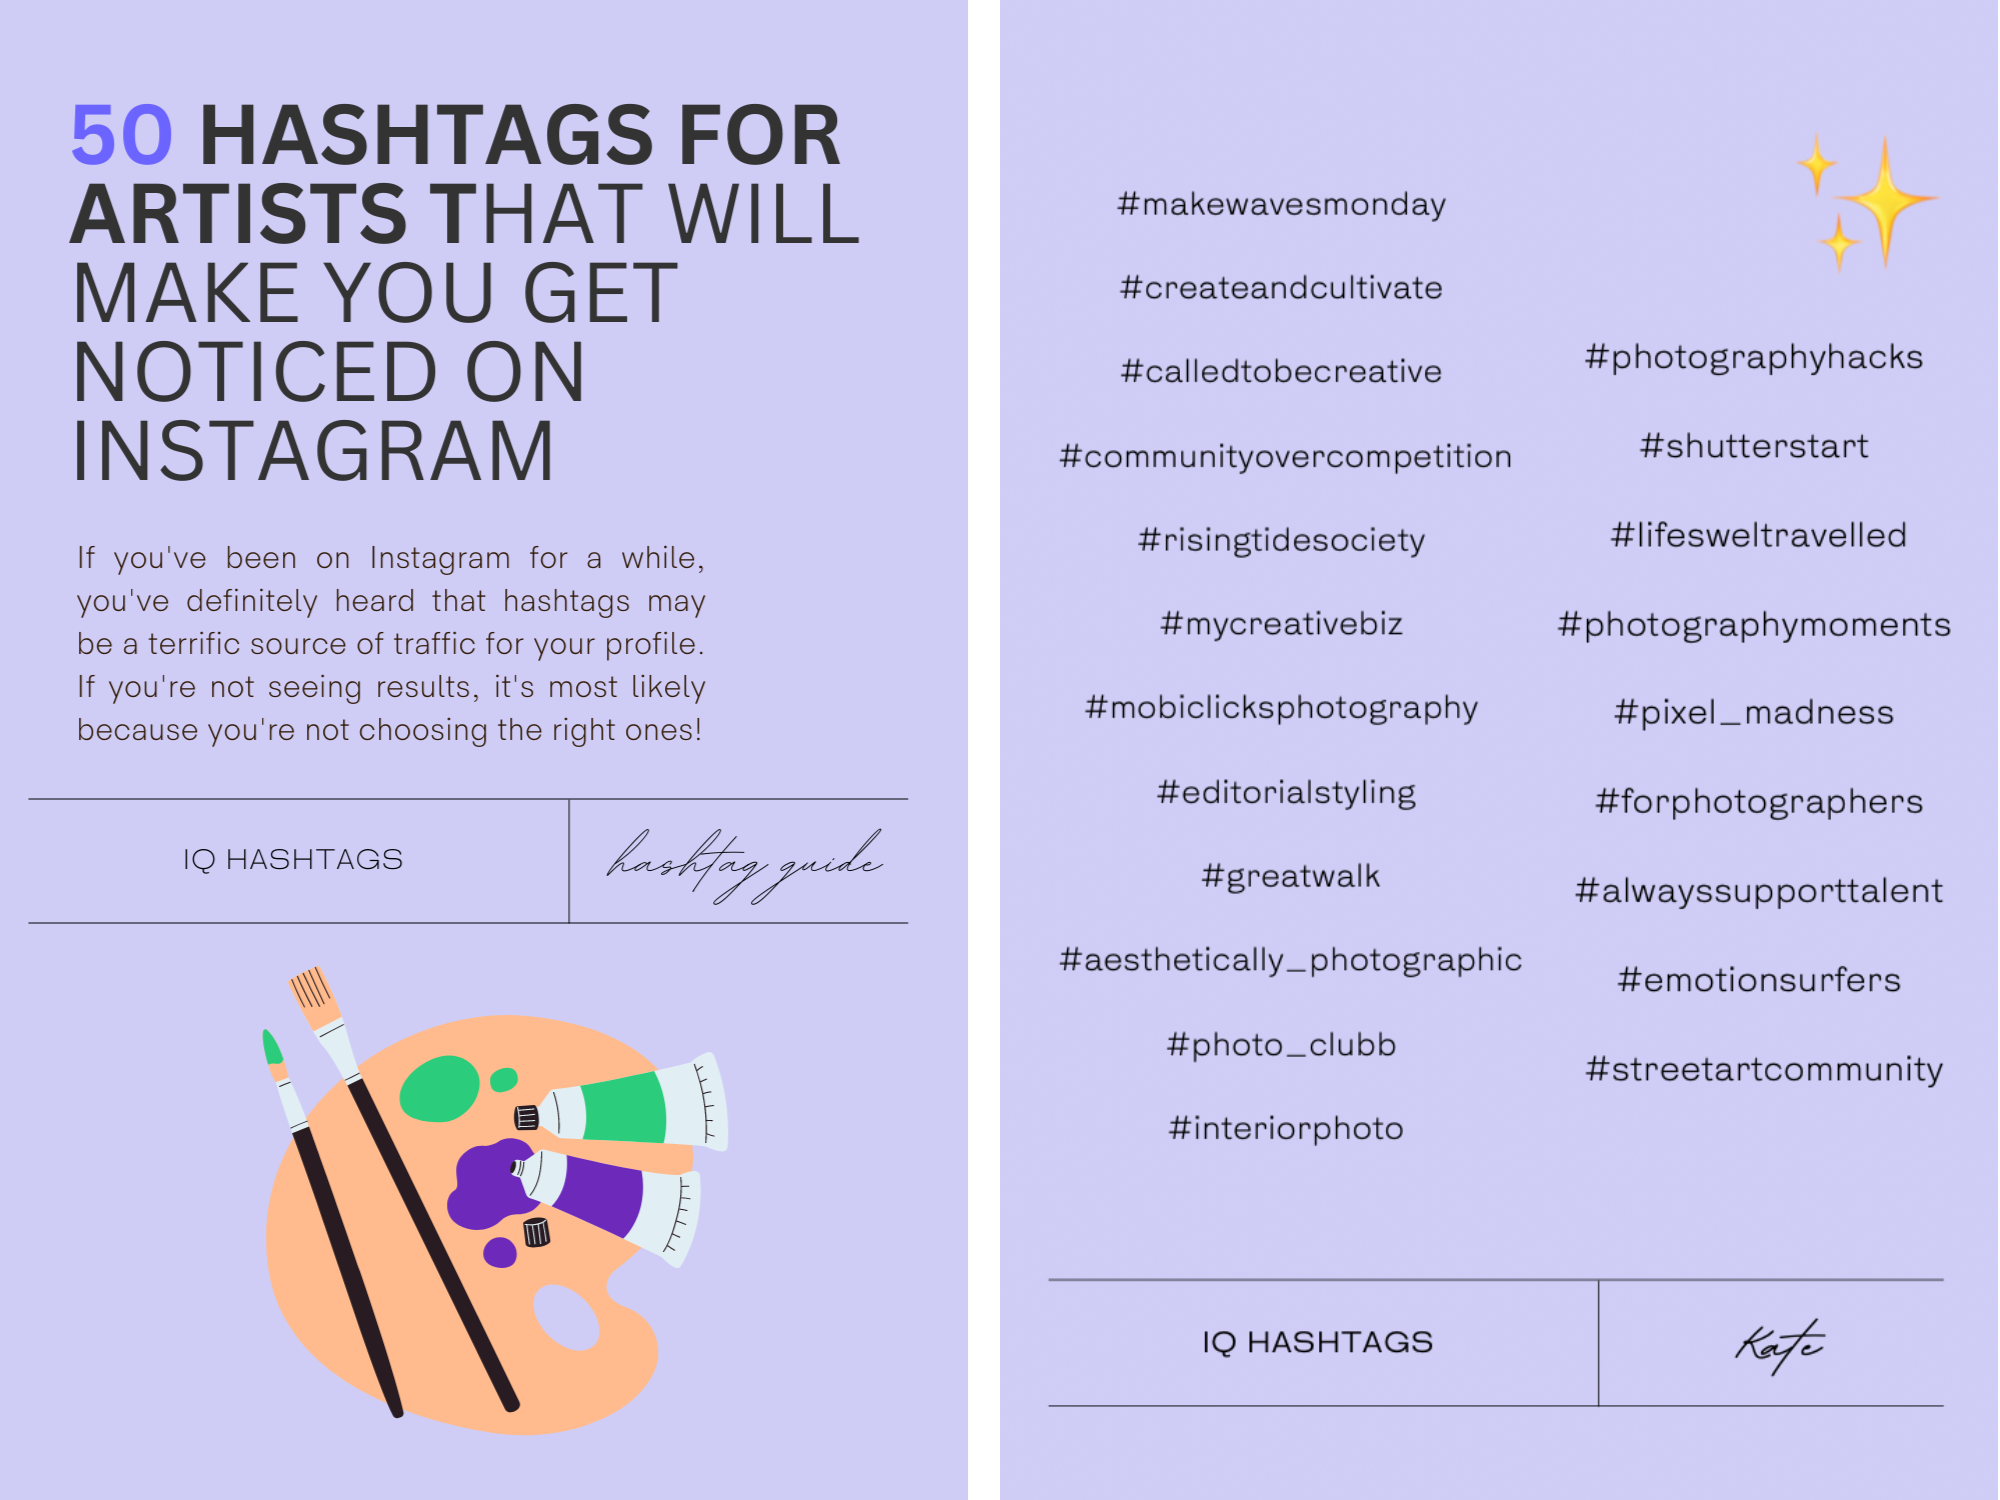 50 Hashtags for Artists That Will Make You Get Noticed on Instagram